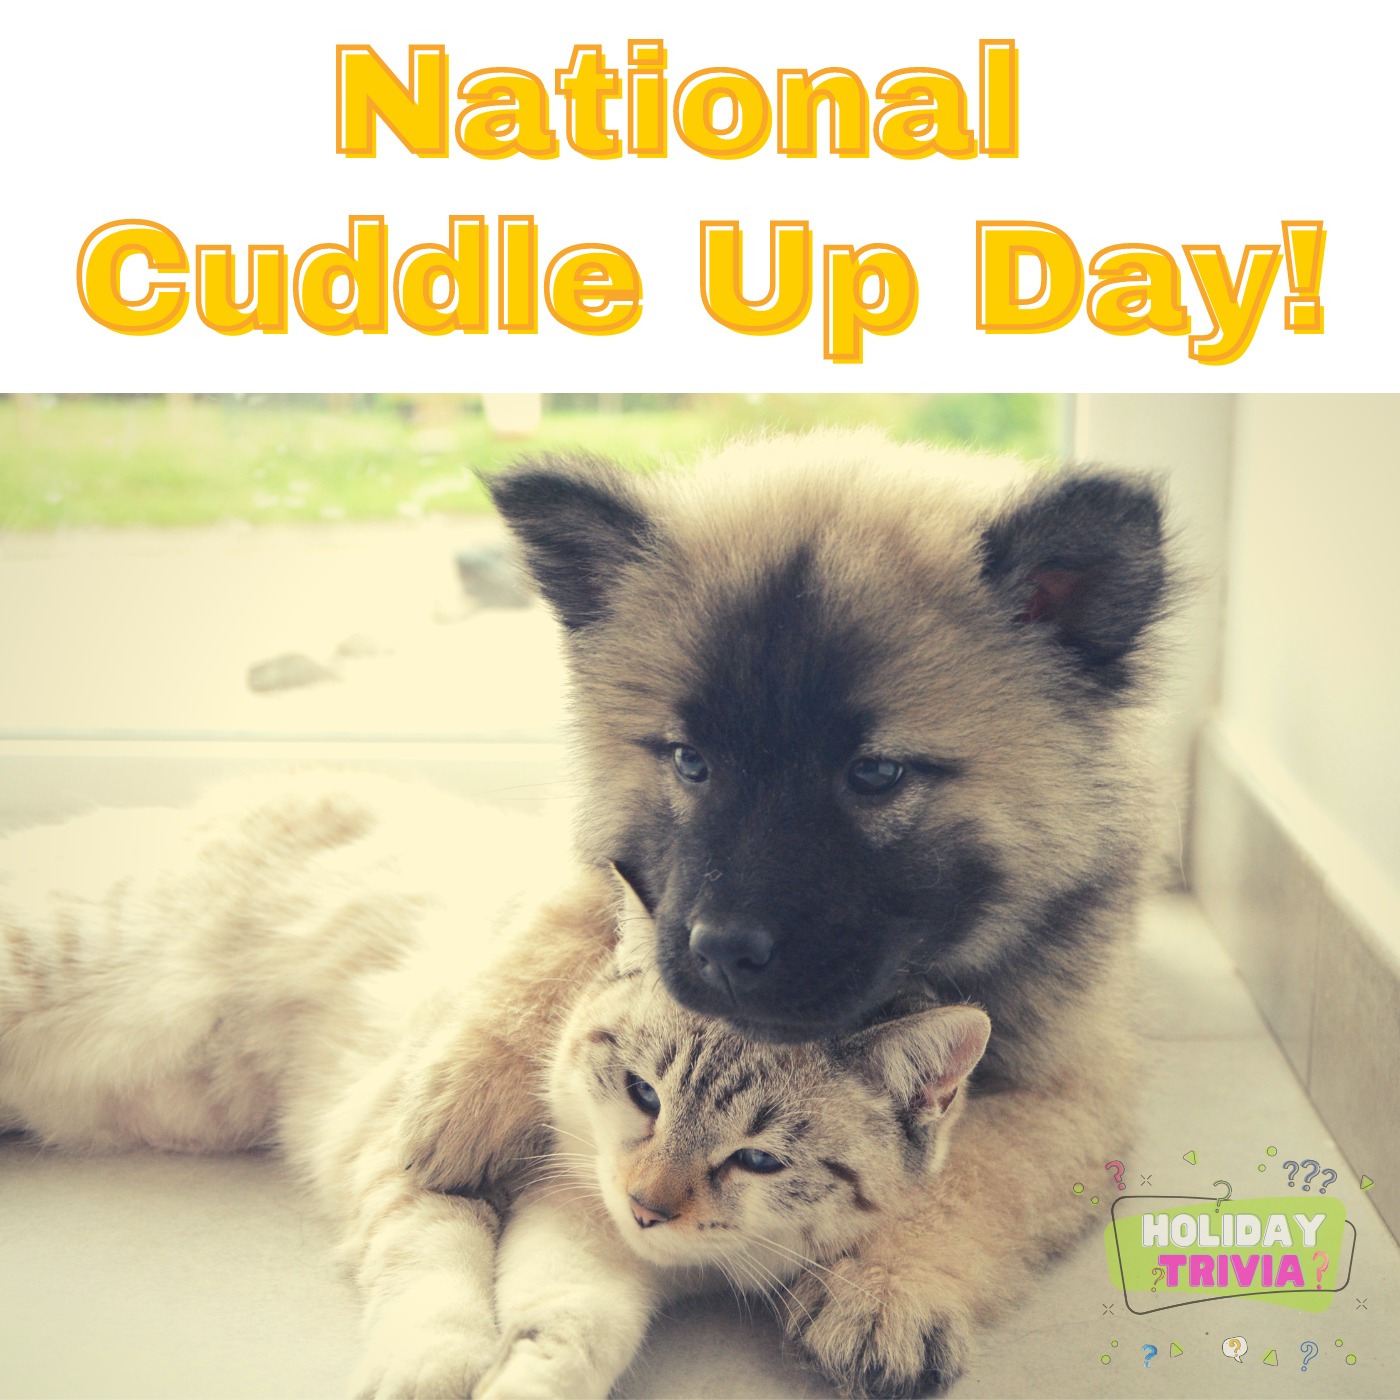 Episode #058 National Cuddle Up Day!